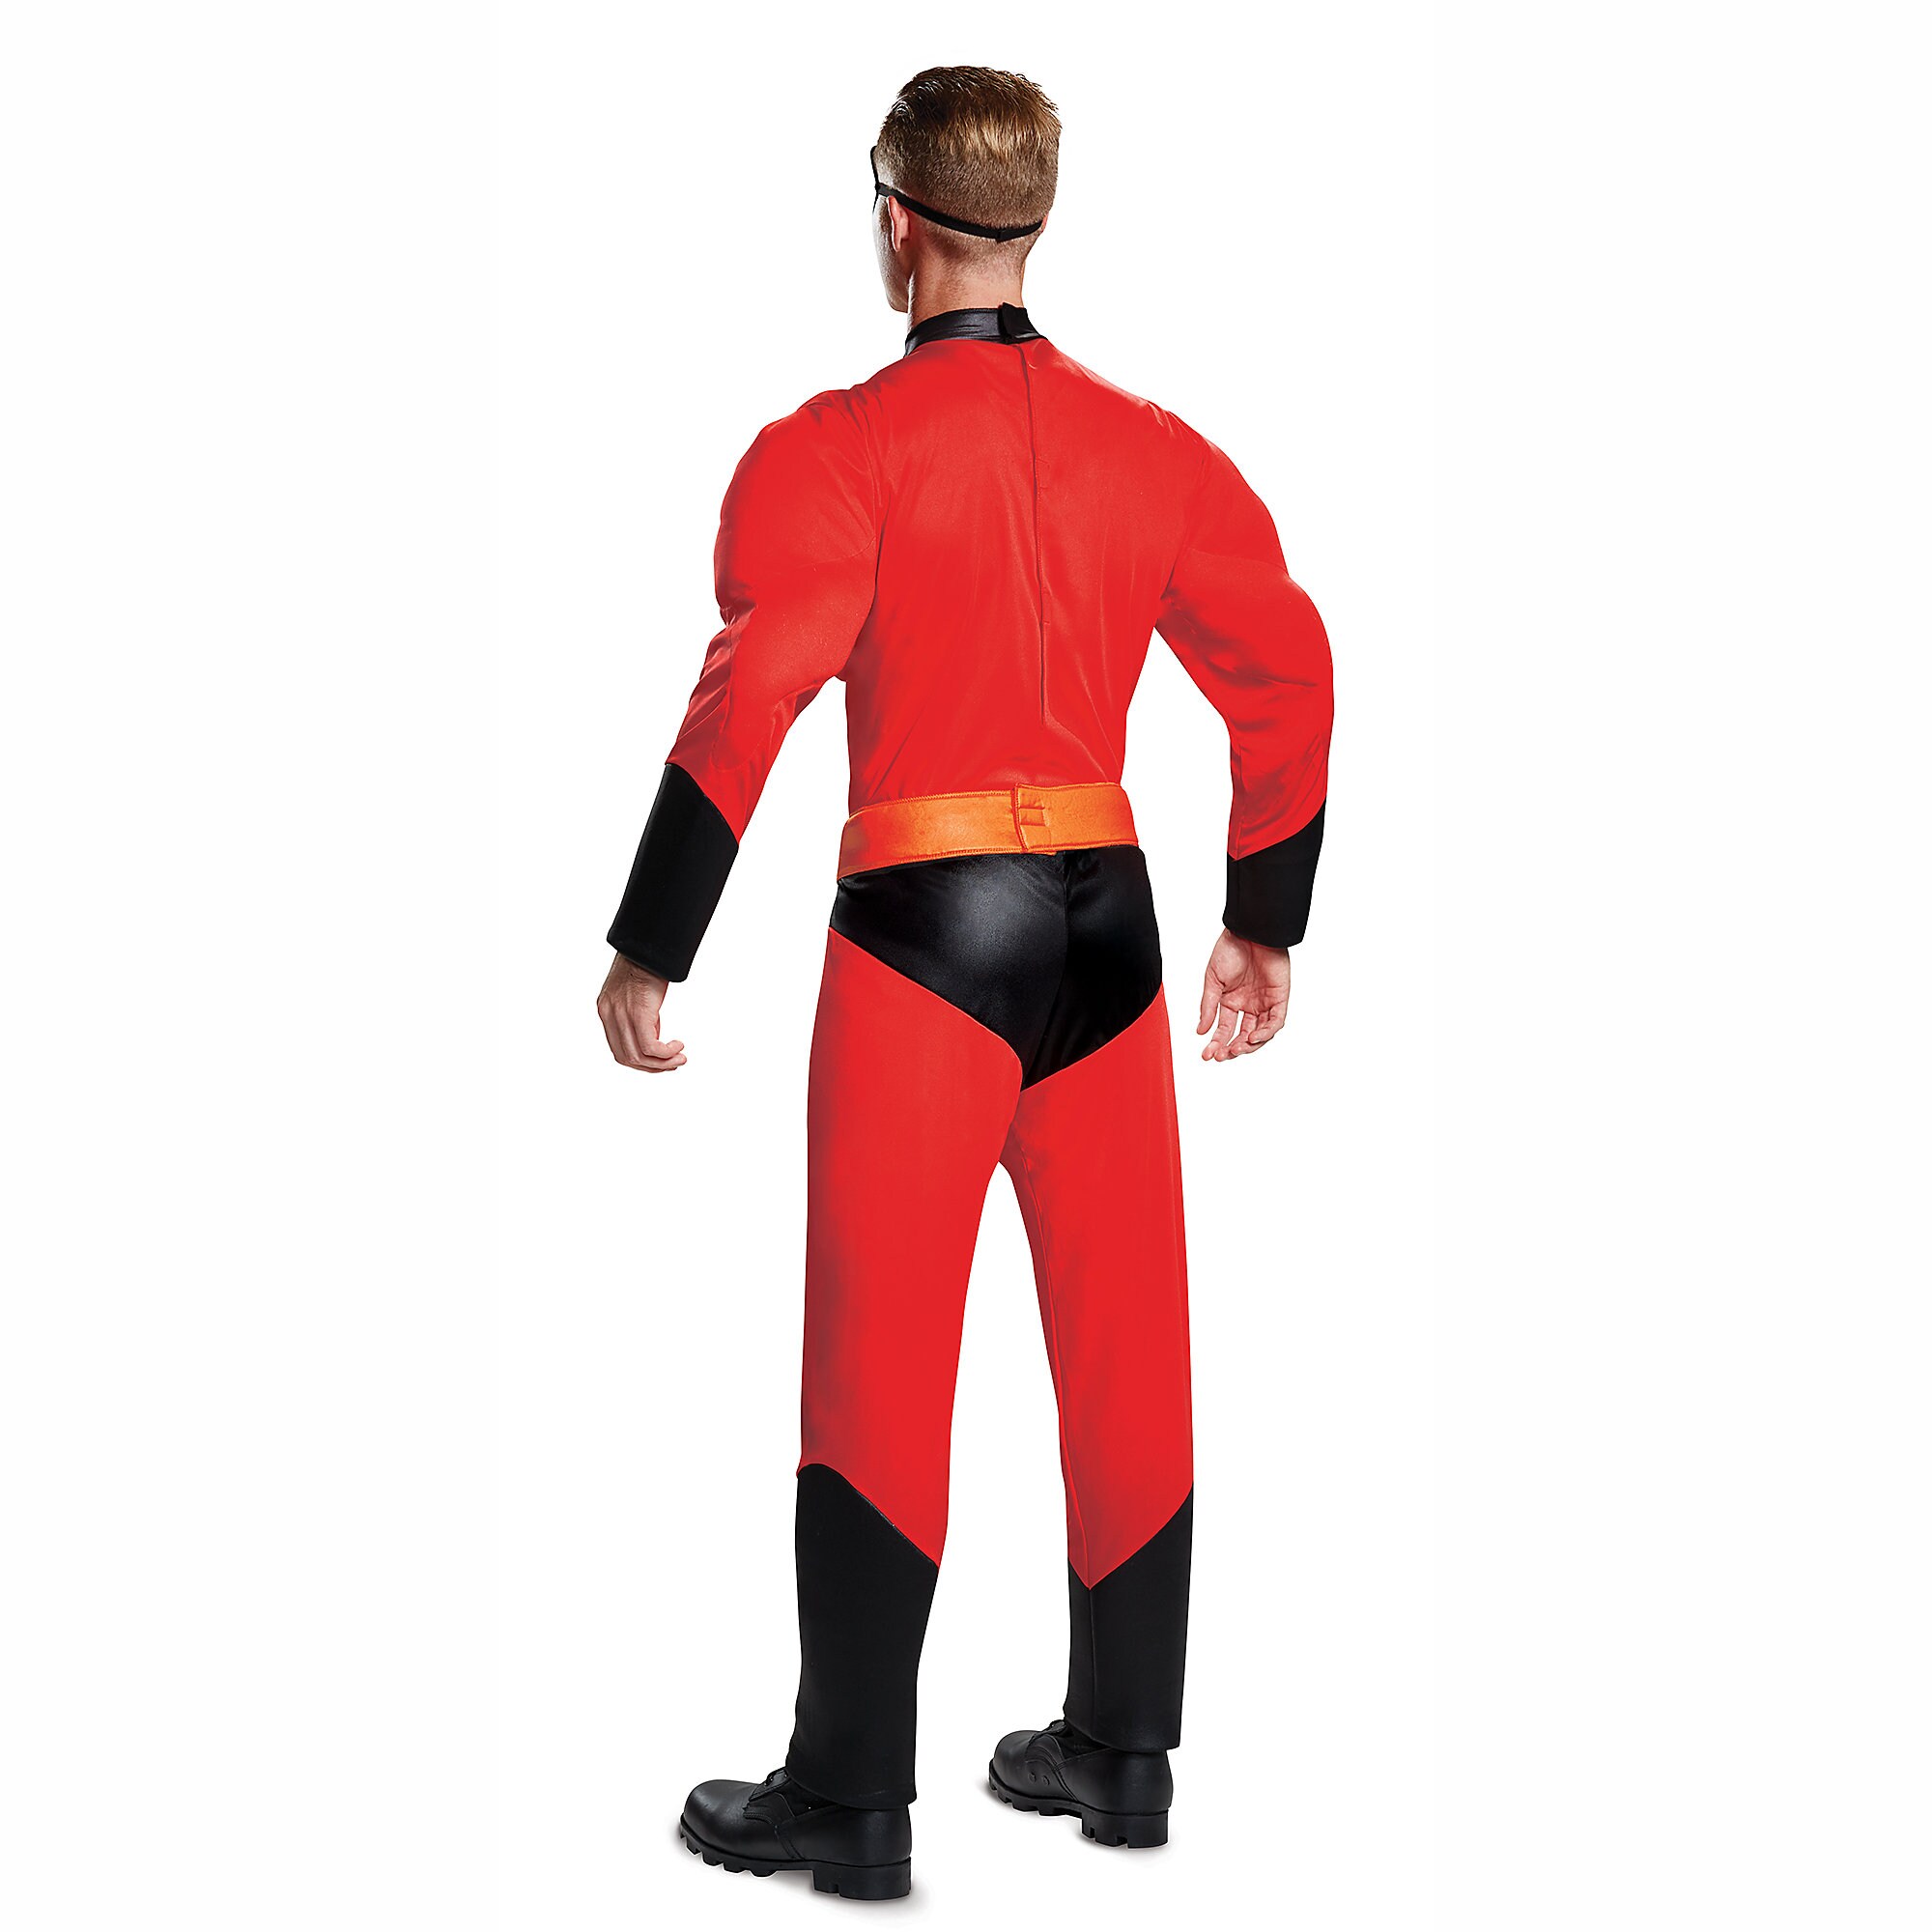 Mr. Incredible Deluxe Costume for Adults by Disguise now available ...